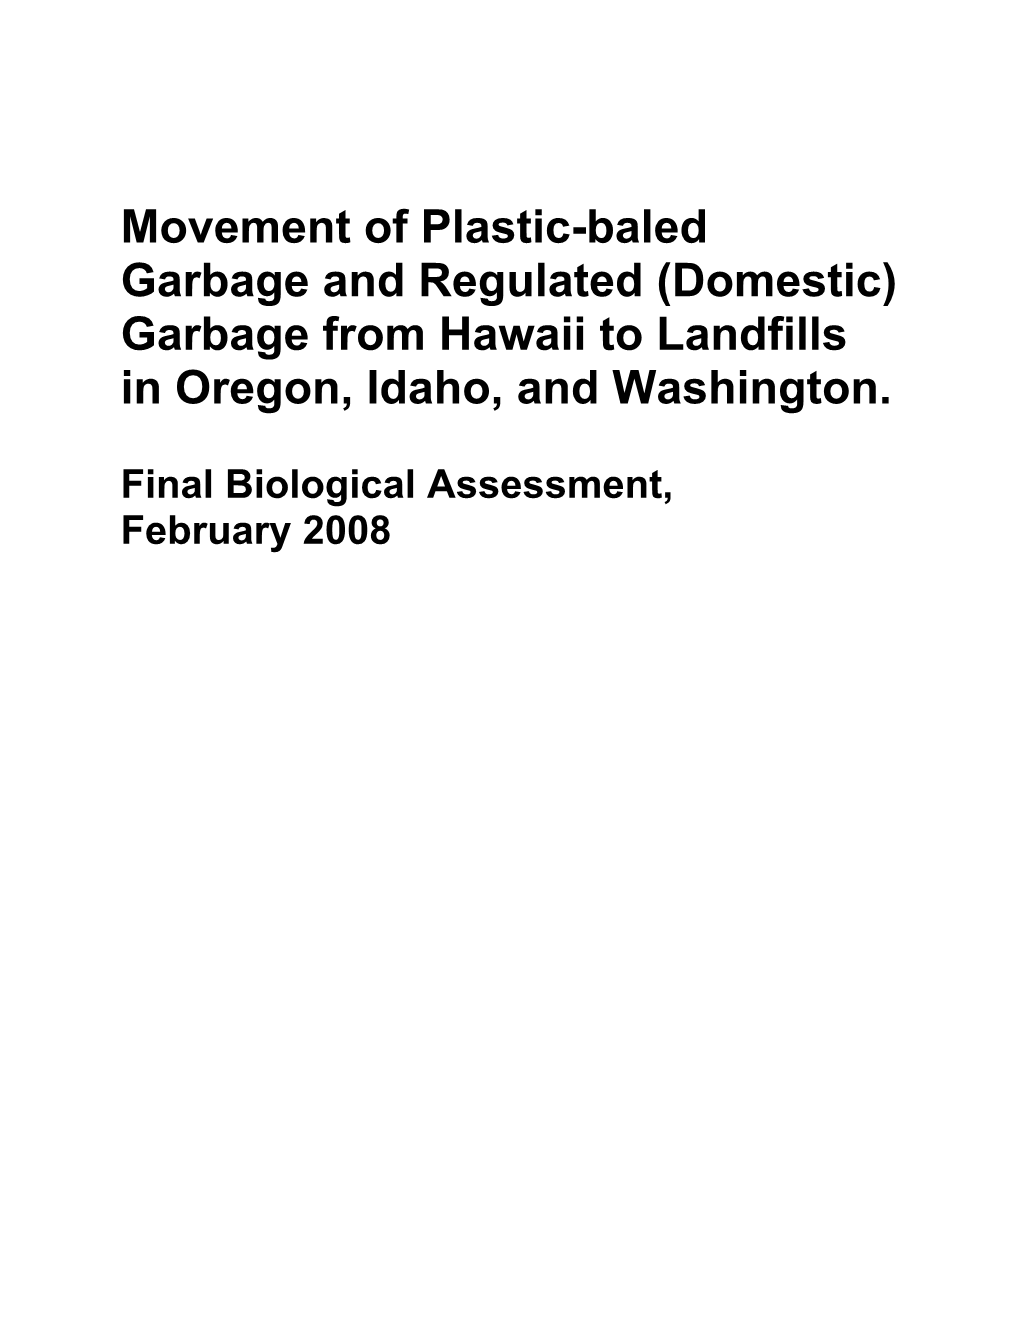 Movement of Plastic-Baled Garbage and Regulated (Domestic) Garbage from Hawaii to Landfills in Oregon, Idaho, and Washington